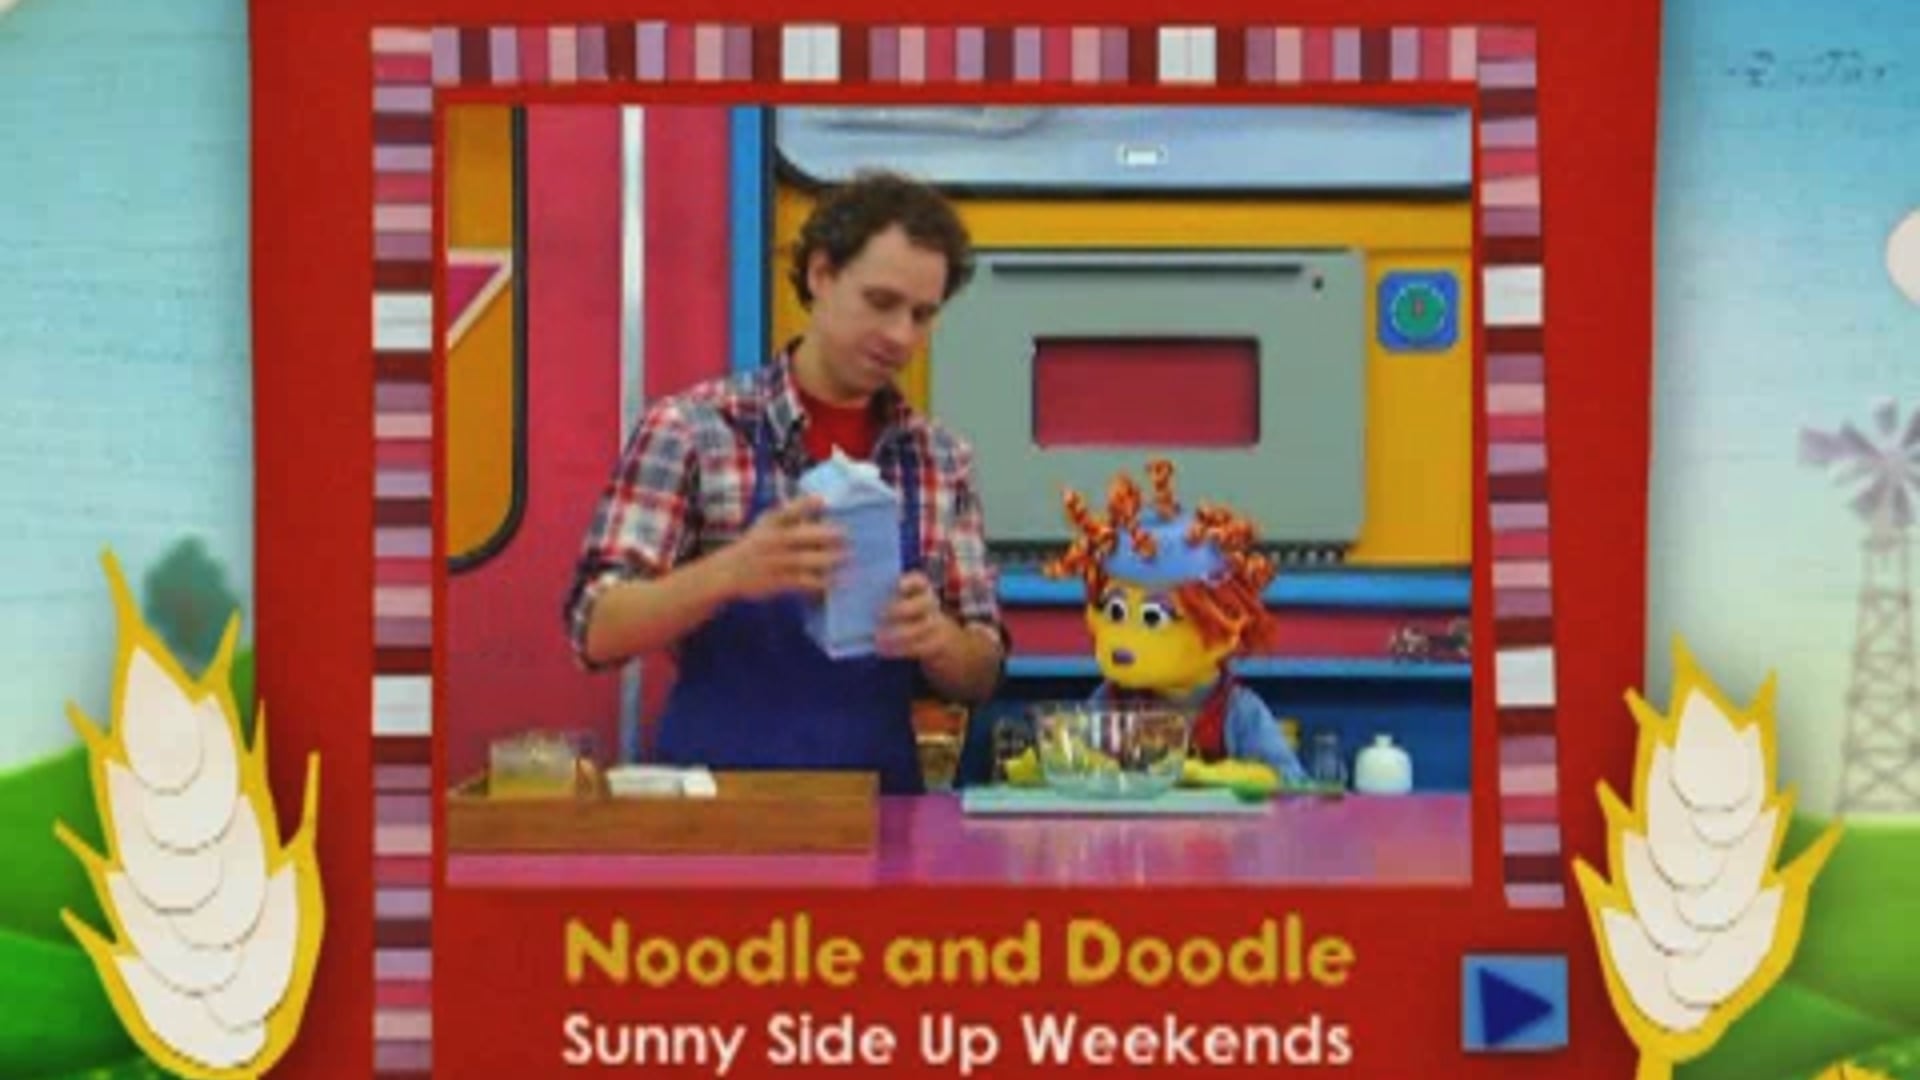 Sprout promo spot - Noodle and Doodle